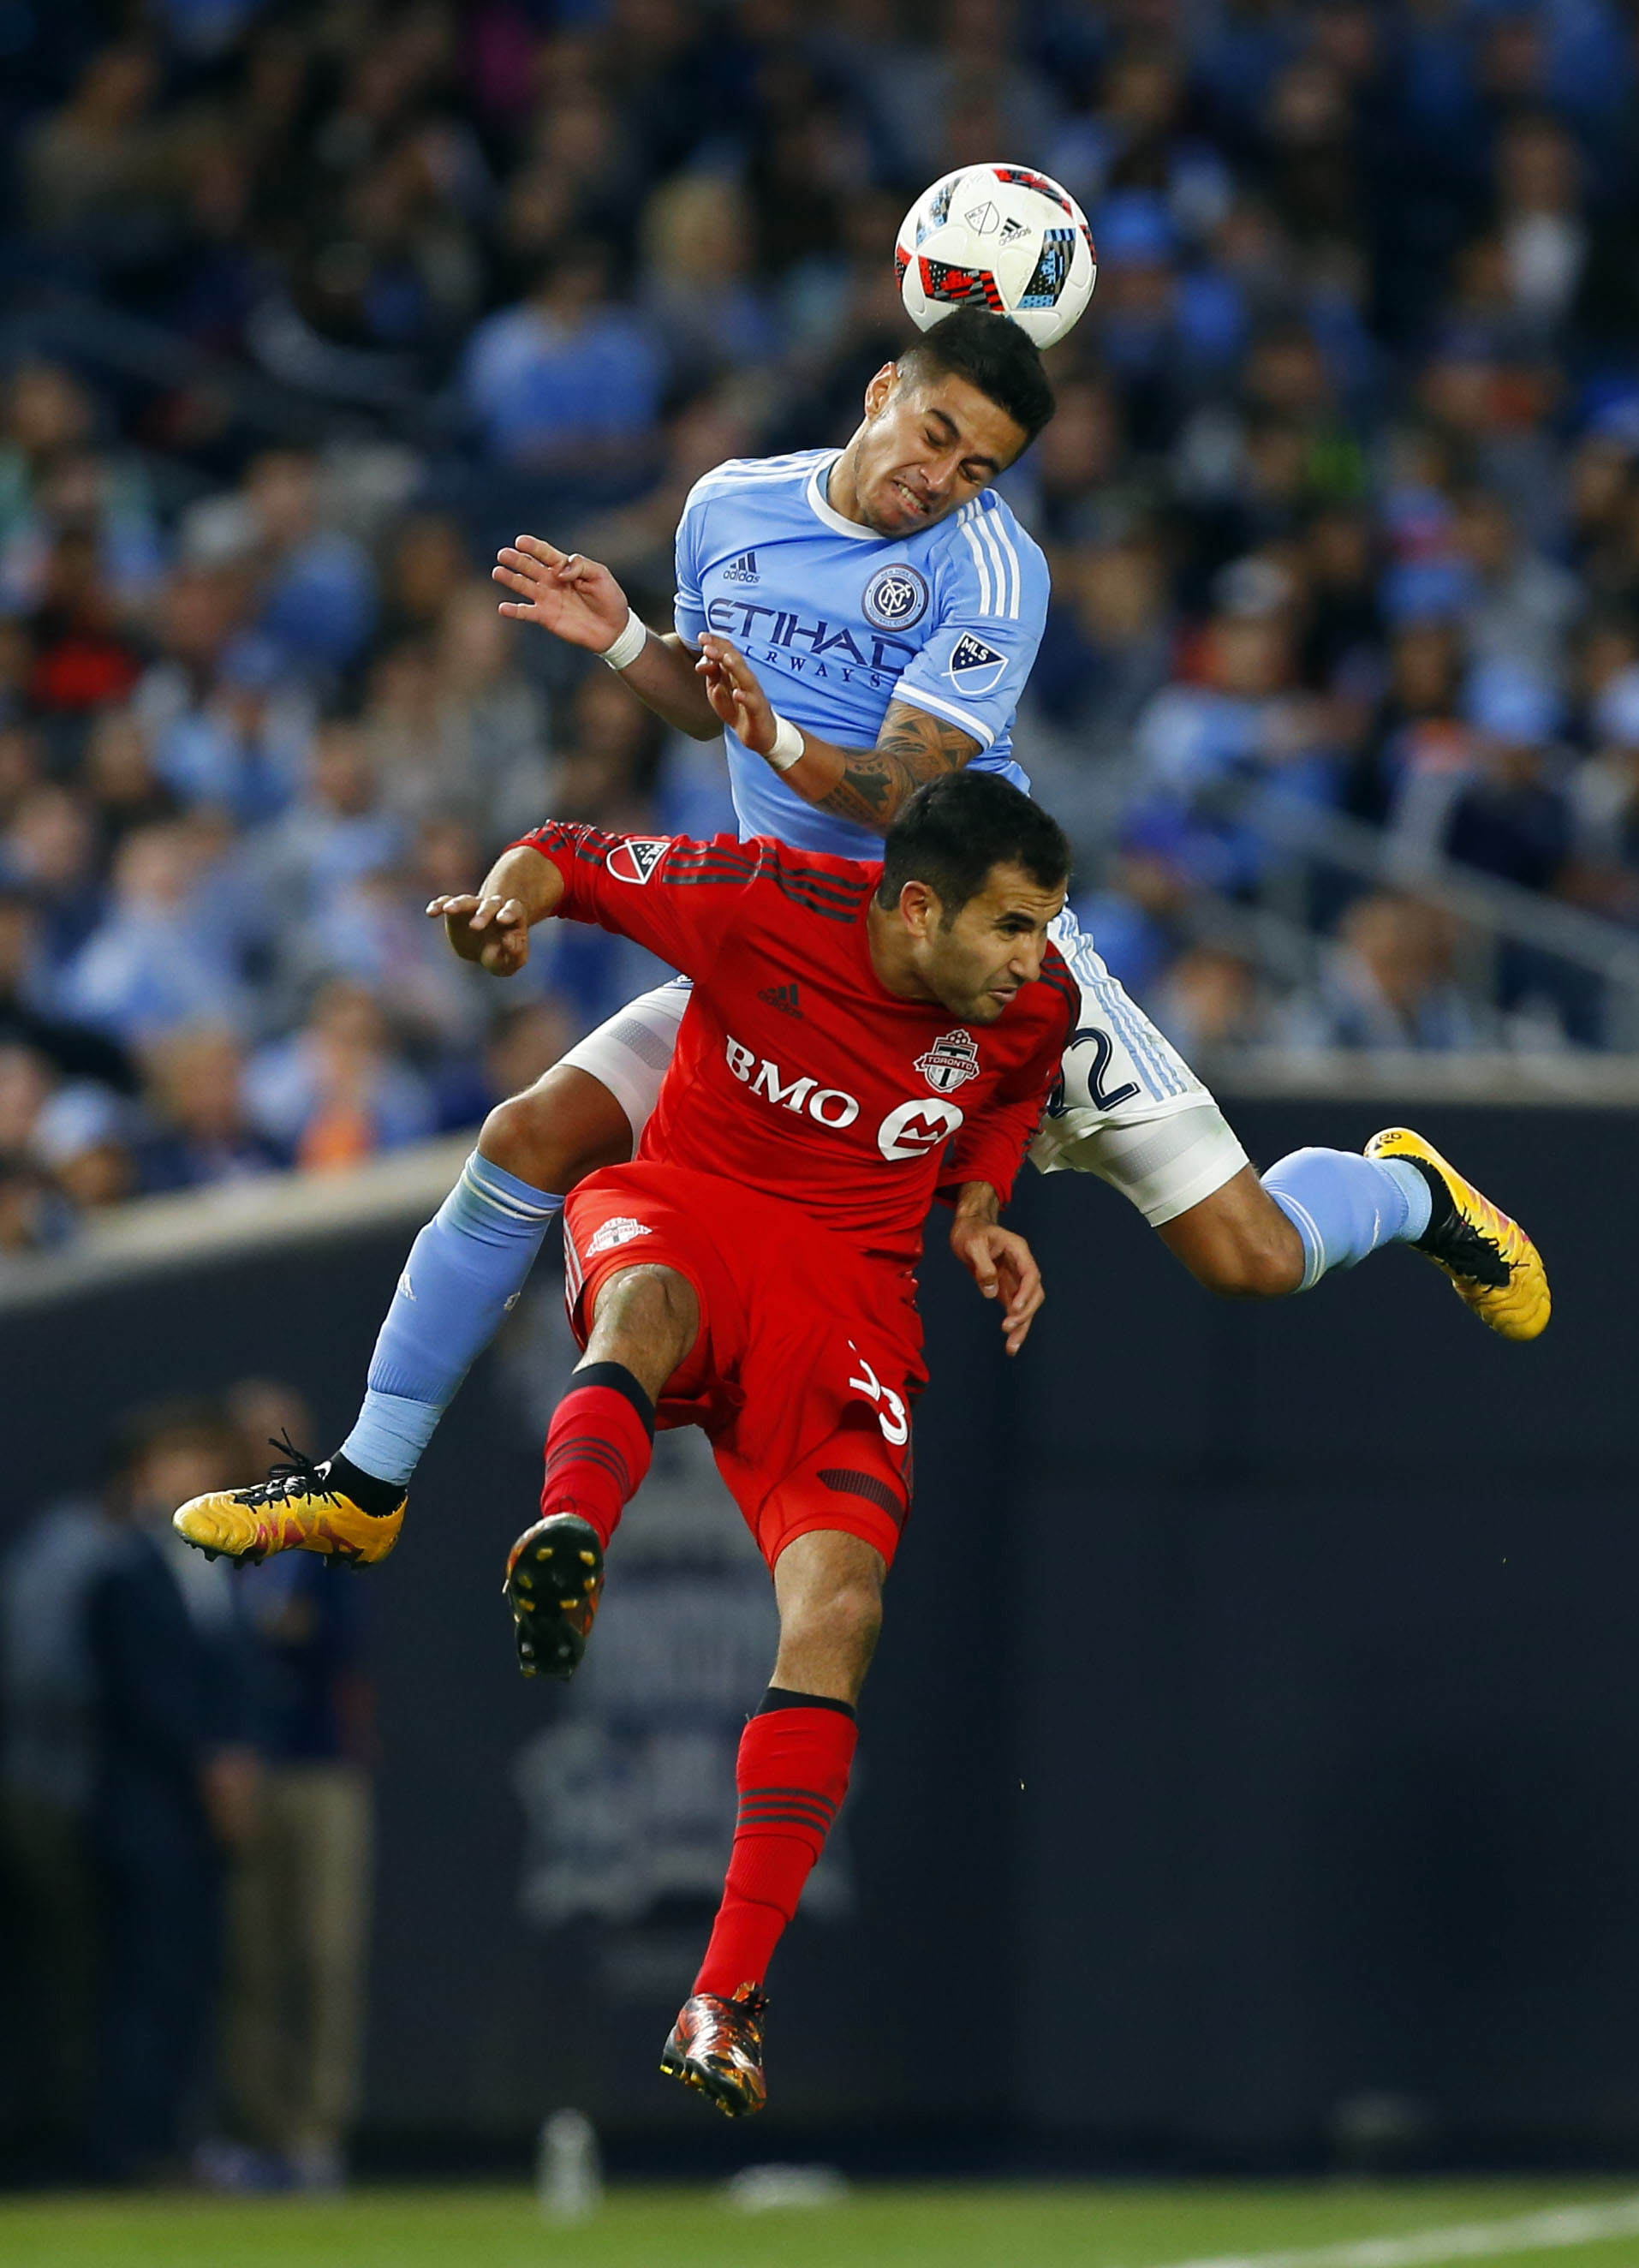 Matarrita has been one of NYCFC's top performers through three games.